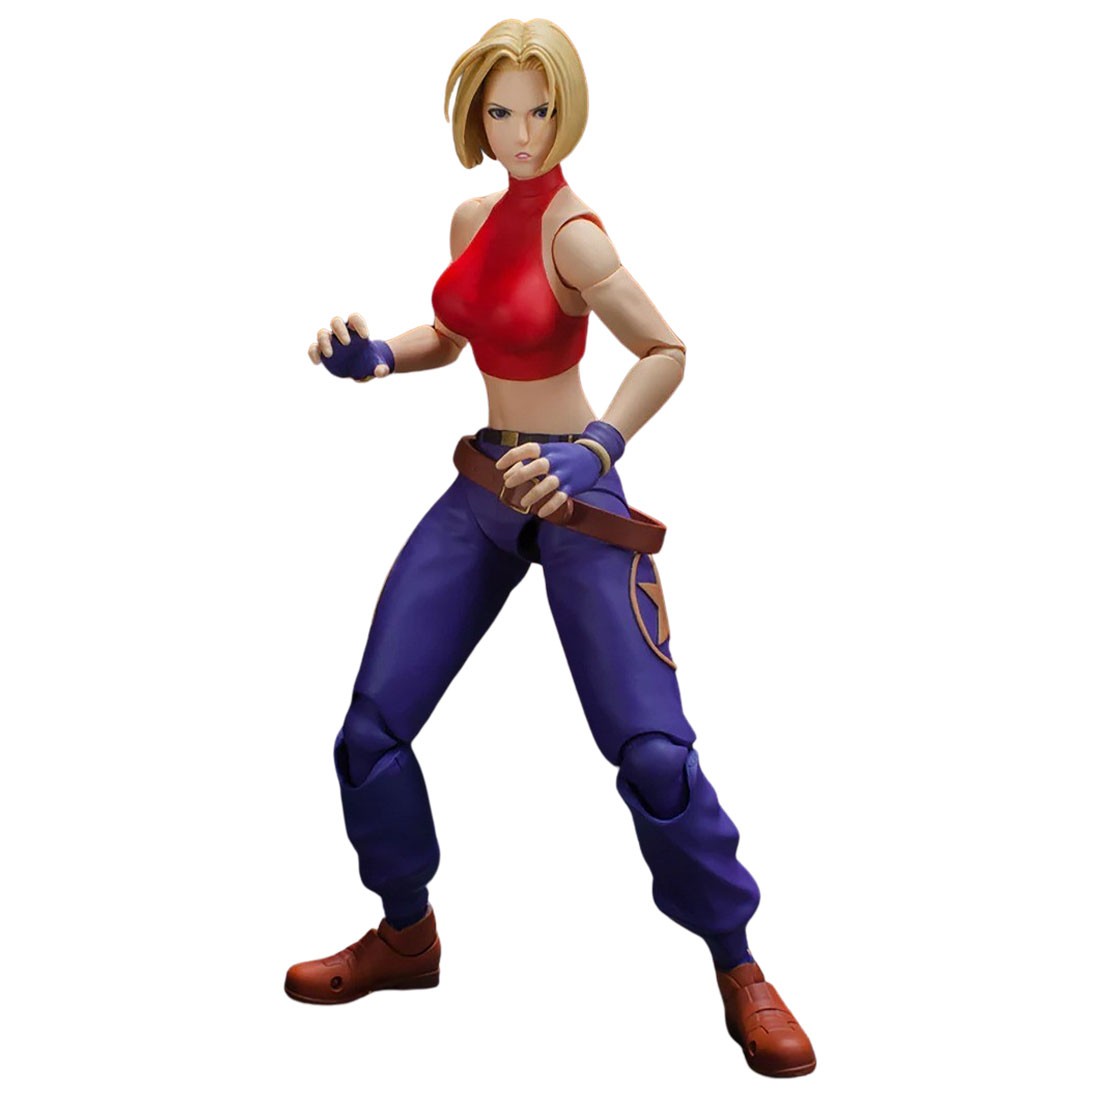 Storm Collectibles King Of Fighters 98 Blue Mary 1/12 Action Figure red